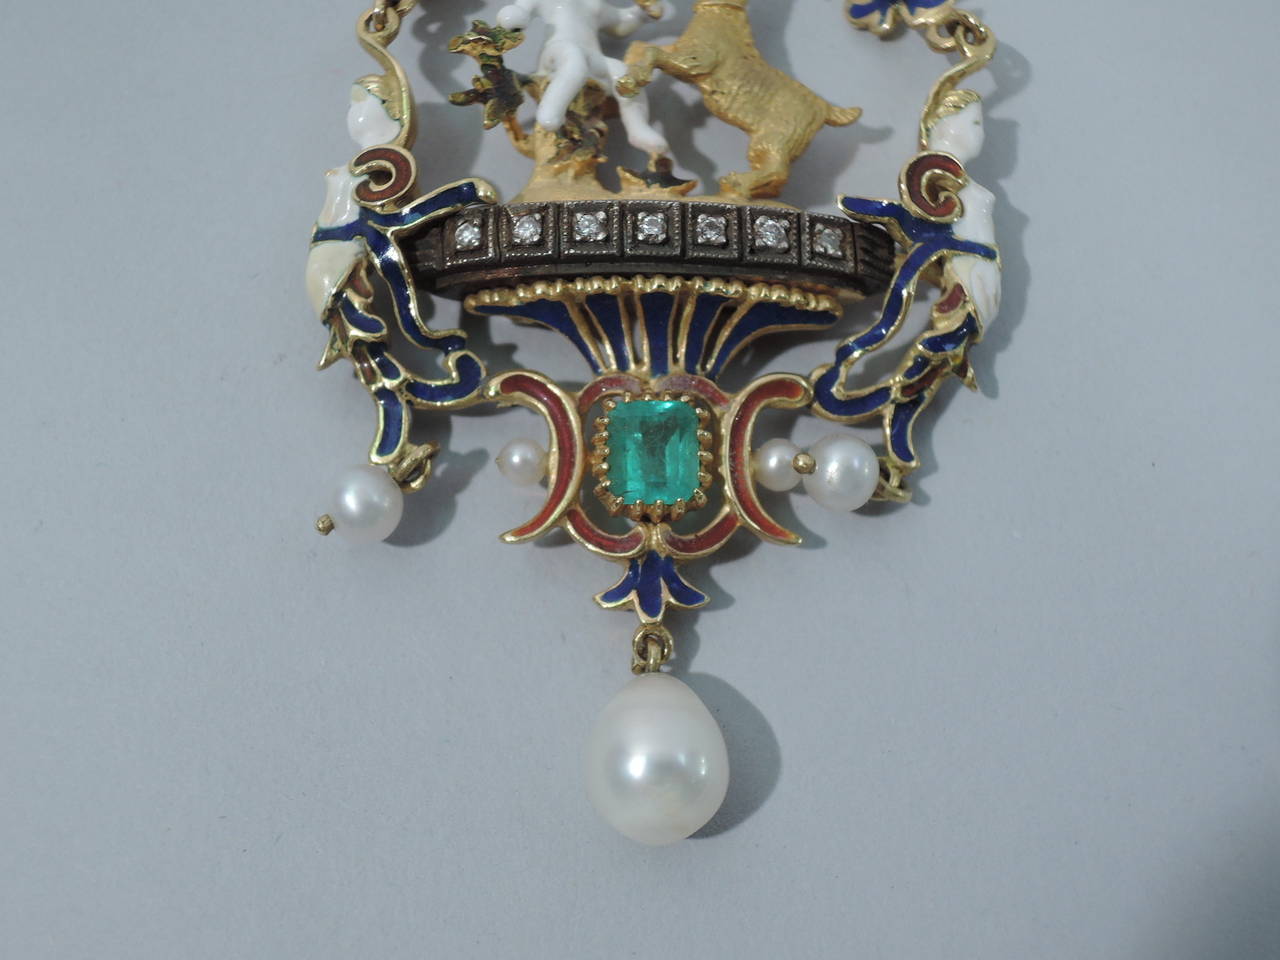 Renaissance Revival Gold and Enamel Pendant with Pearls and Emeralds 1